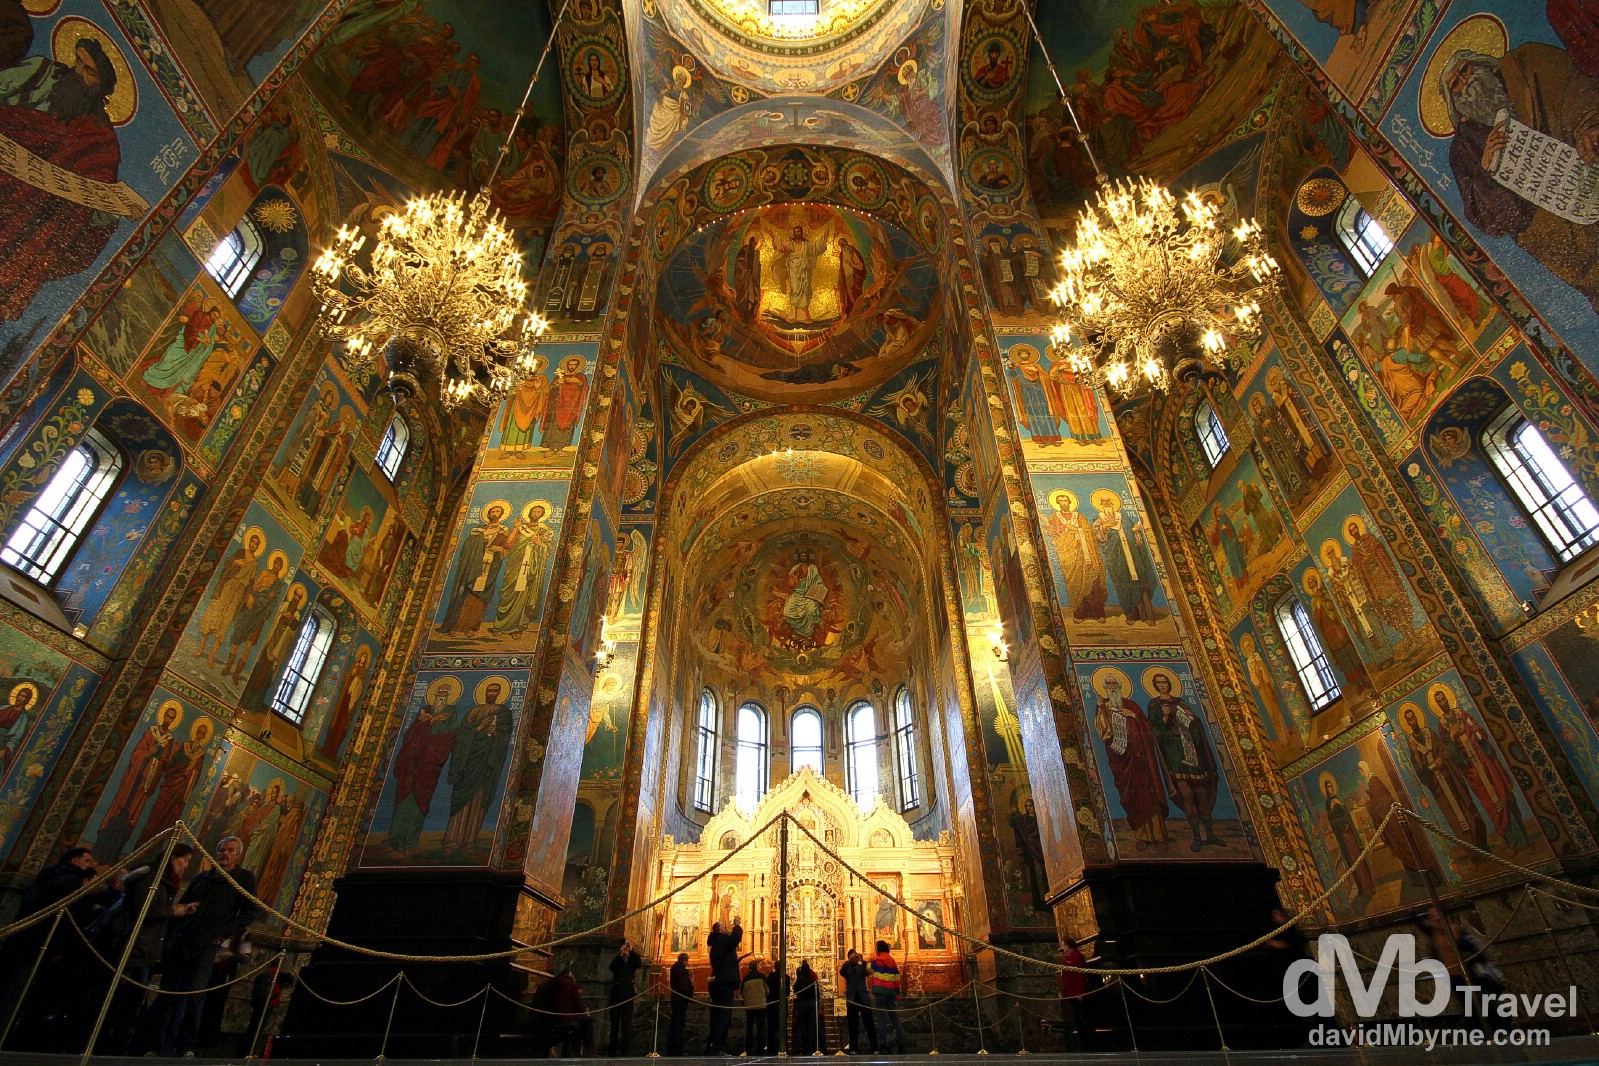 The impressive interior of the Cathedral of the Resurrection of Christ, aka the Church on Spilled Blood, in St Petersburg, Russia. November 23rd 2012.